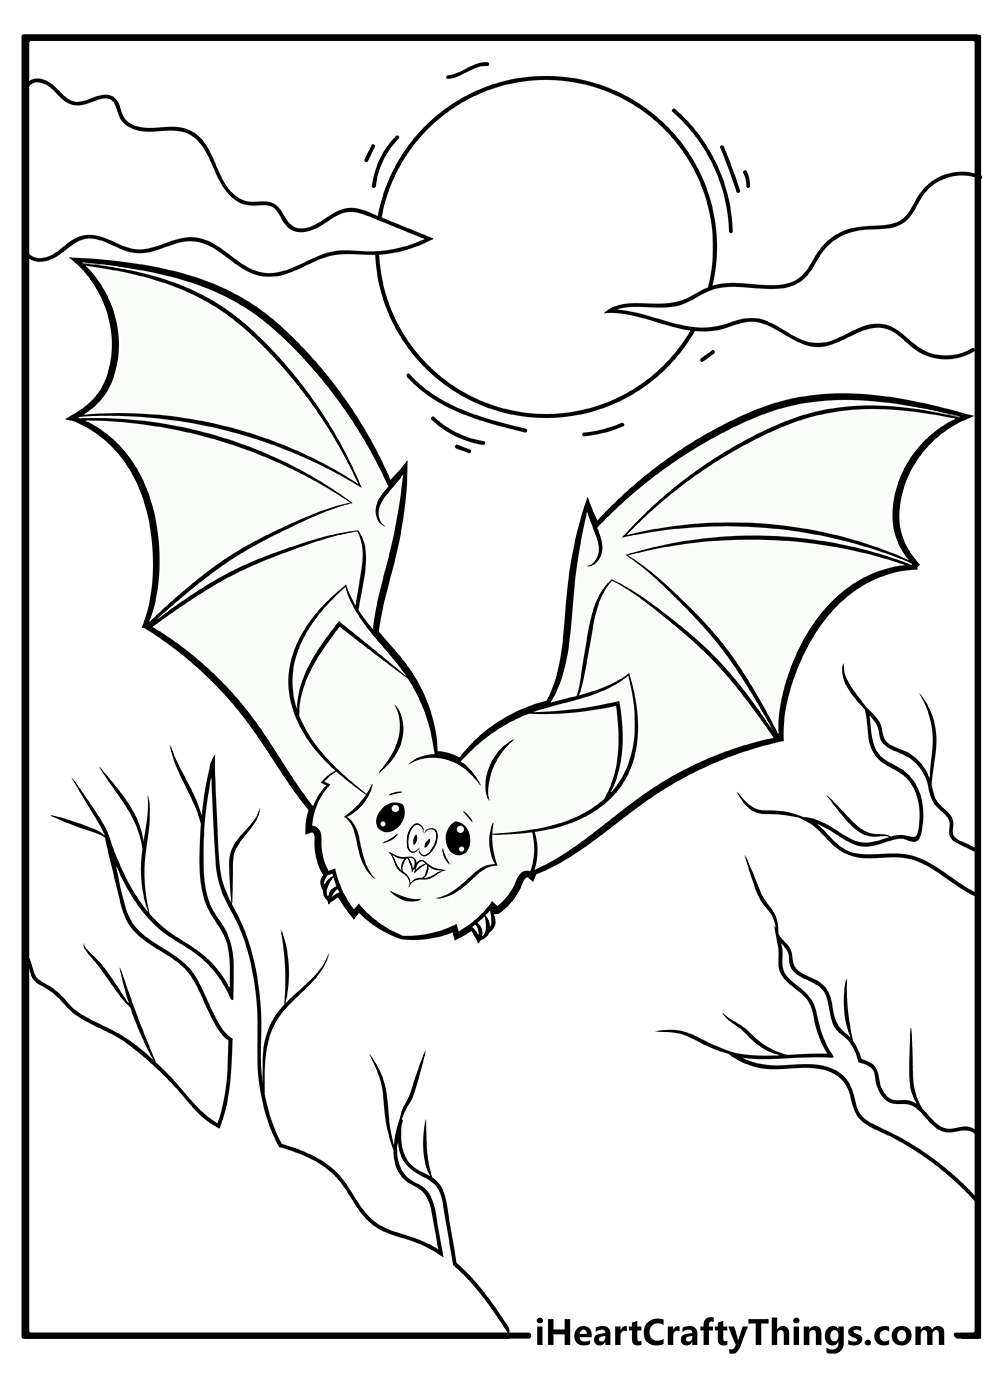 Bat coloring pages free printables